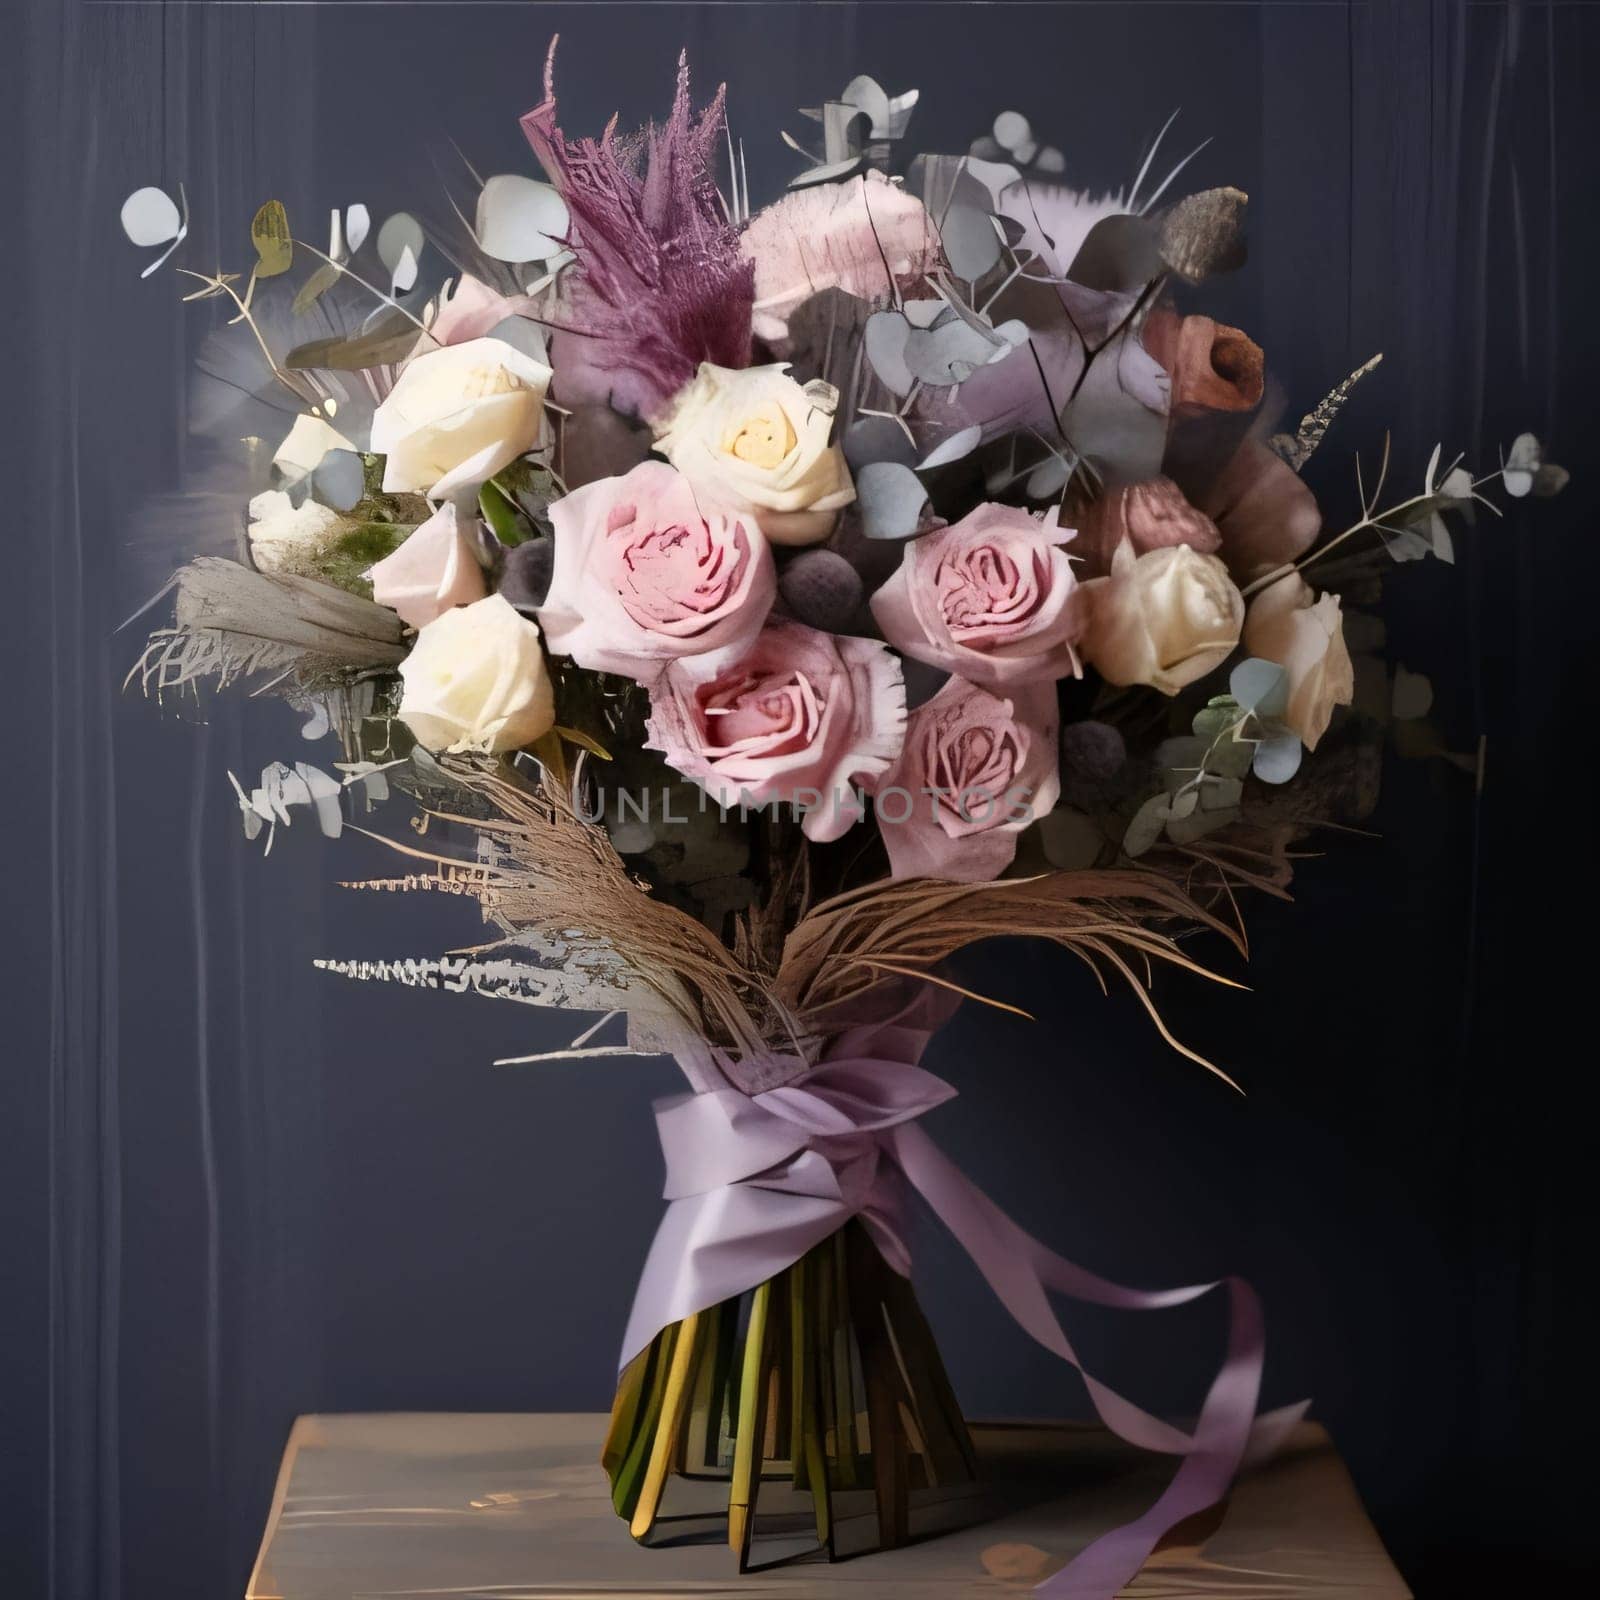 Bouquet of bright roses, flowers tied with a ribbon on a dark background. Flowering flowers, a symbol of spring, new life. A joyful time of nature waking up to life.